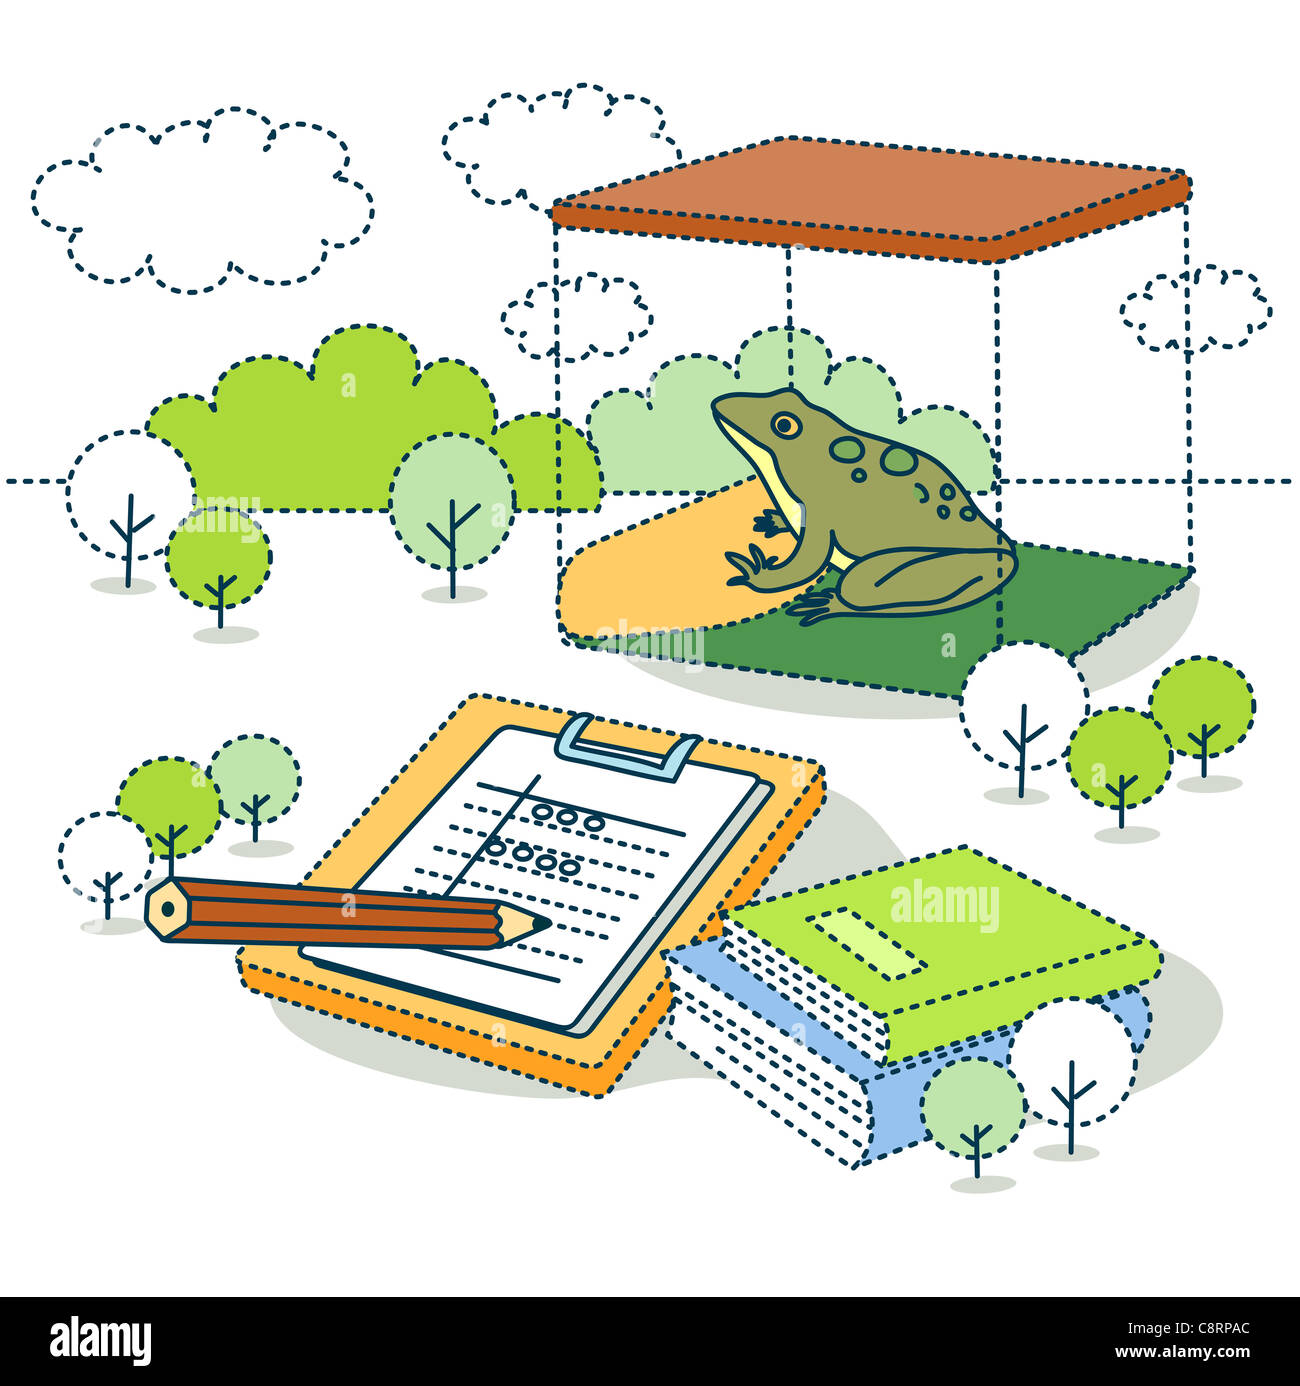 Illustration of frog for scientific experiment with books Stock Photo